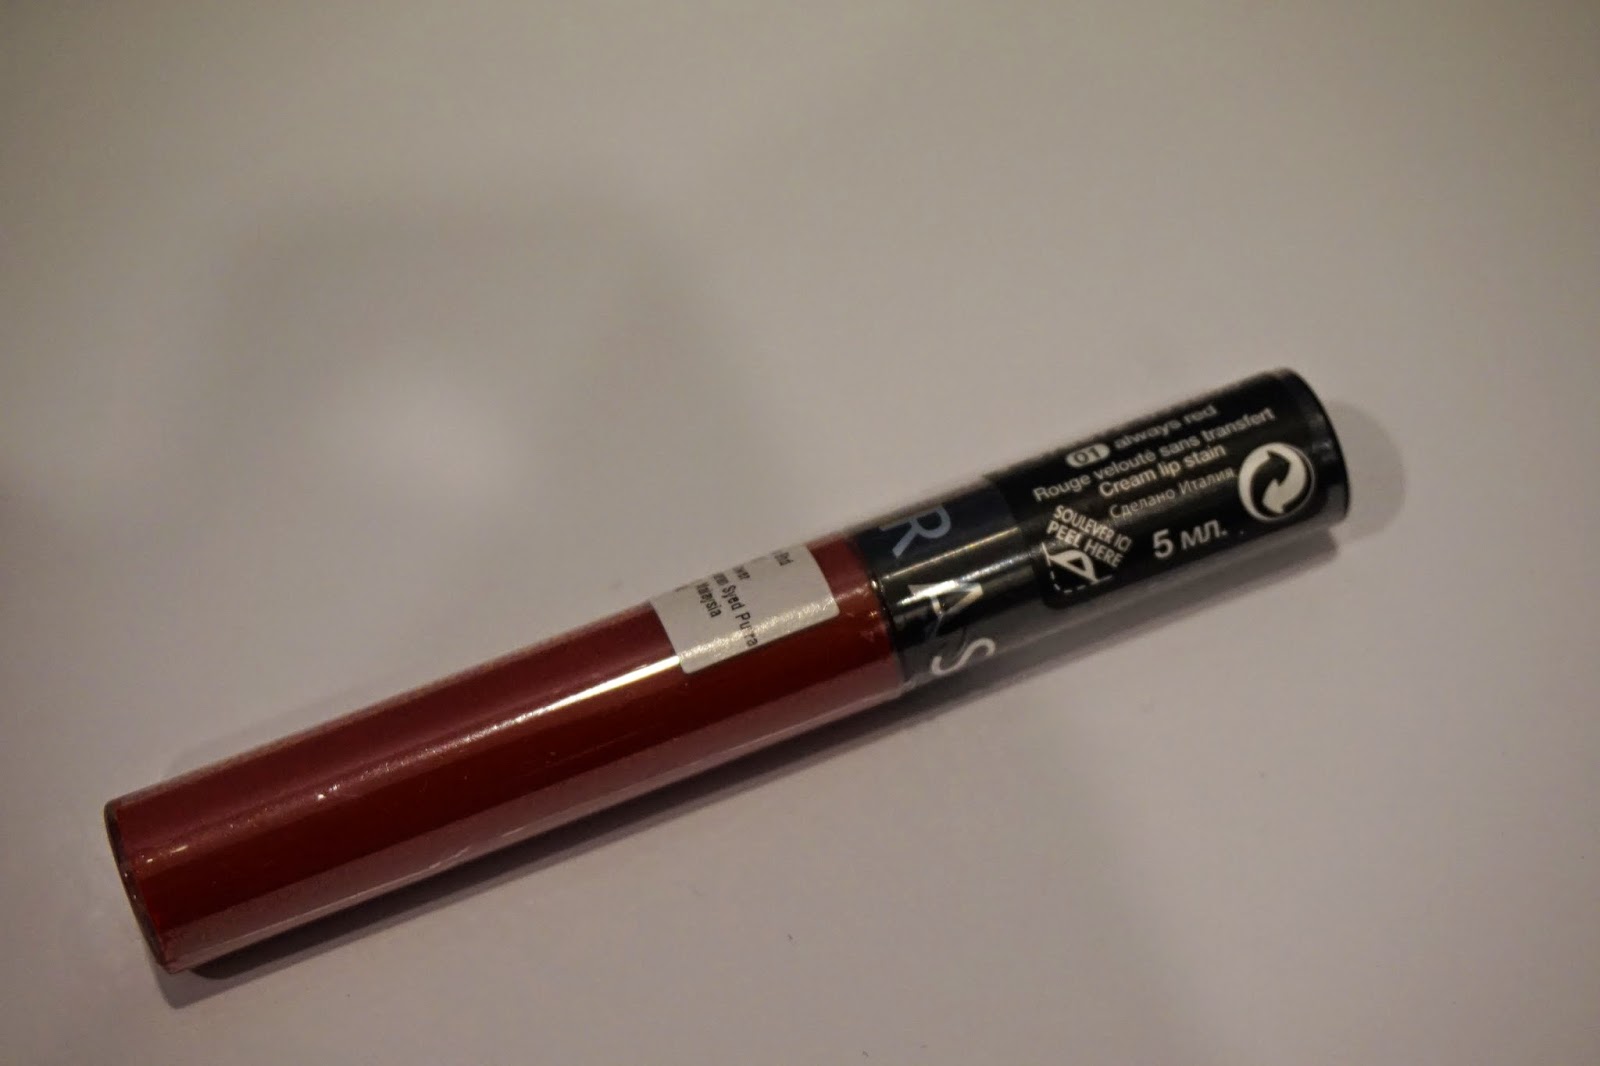 Sephora Haul and mini reviews - Sephora Cream Lip Stain 01 Always Red - Dusty Foxes Beauty Blog